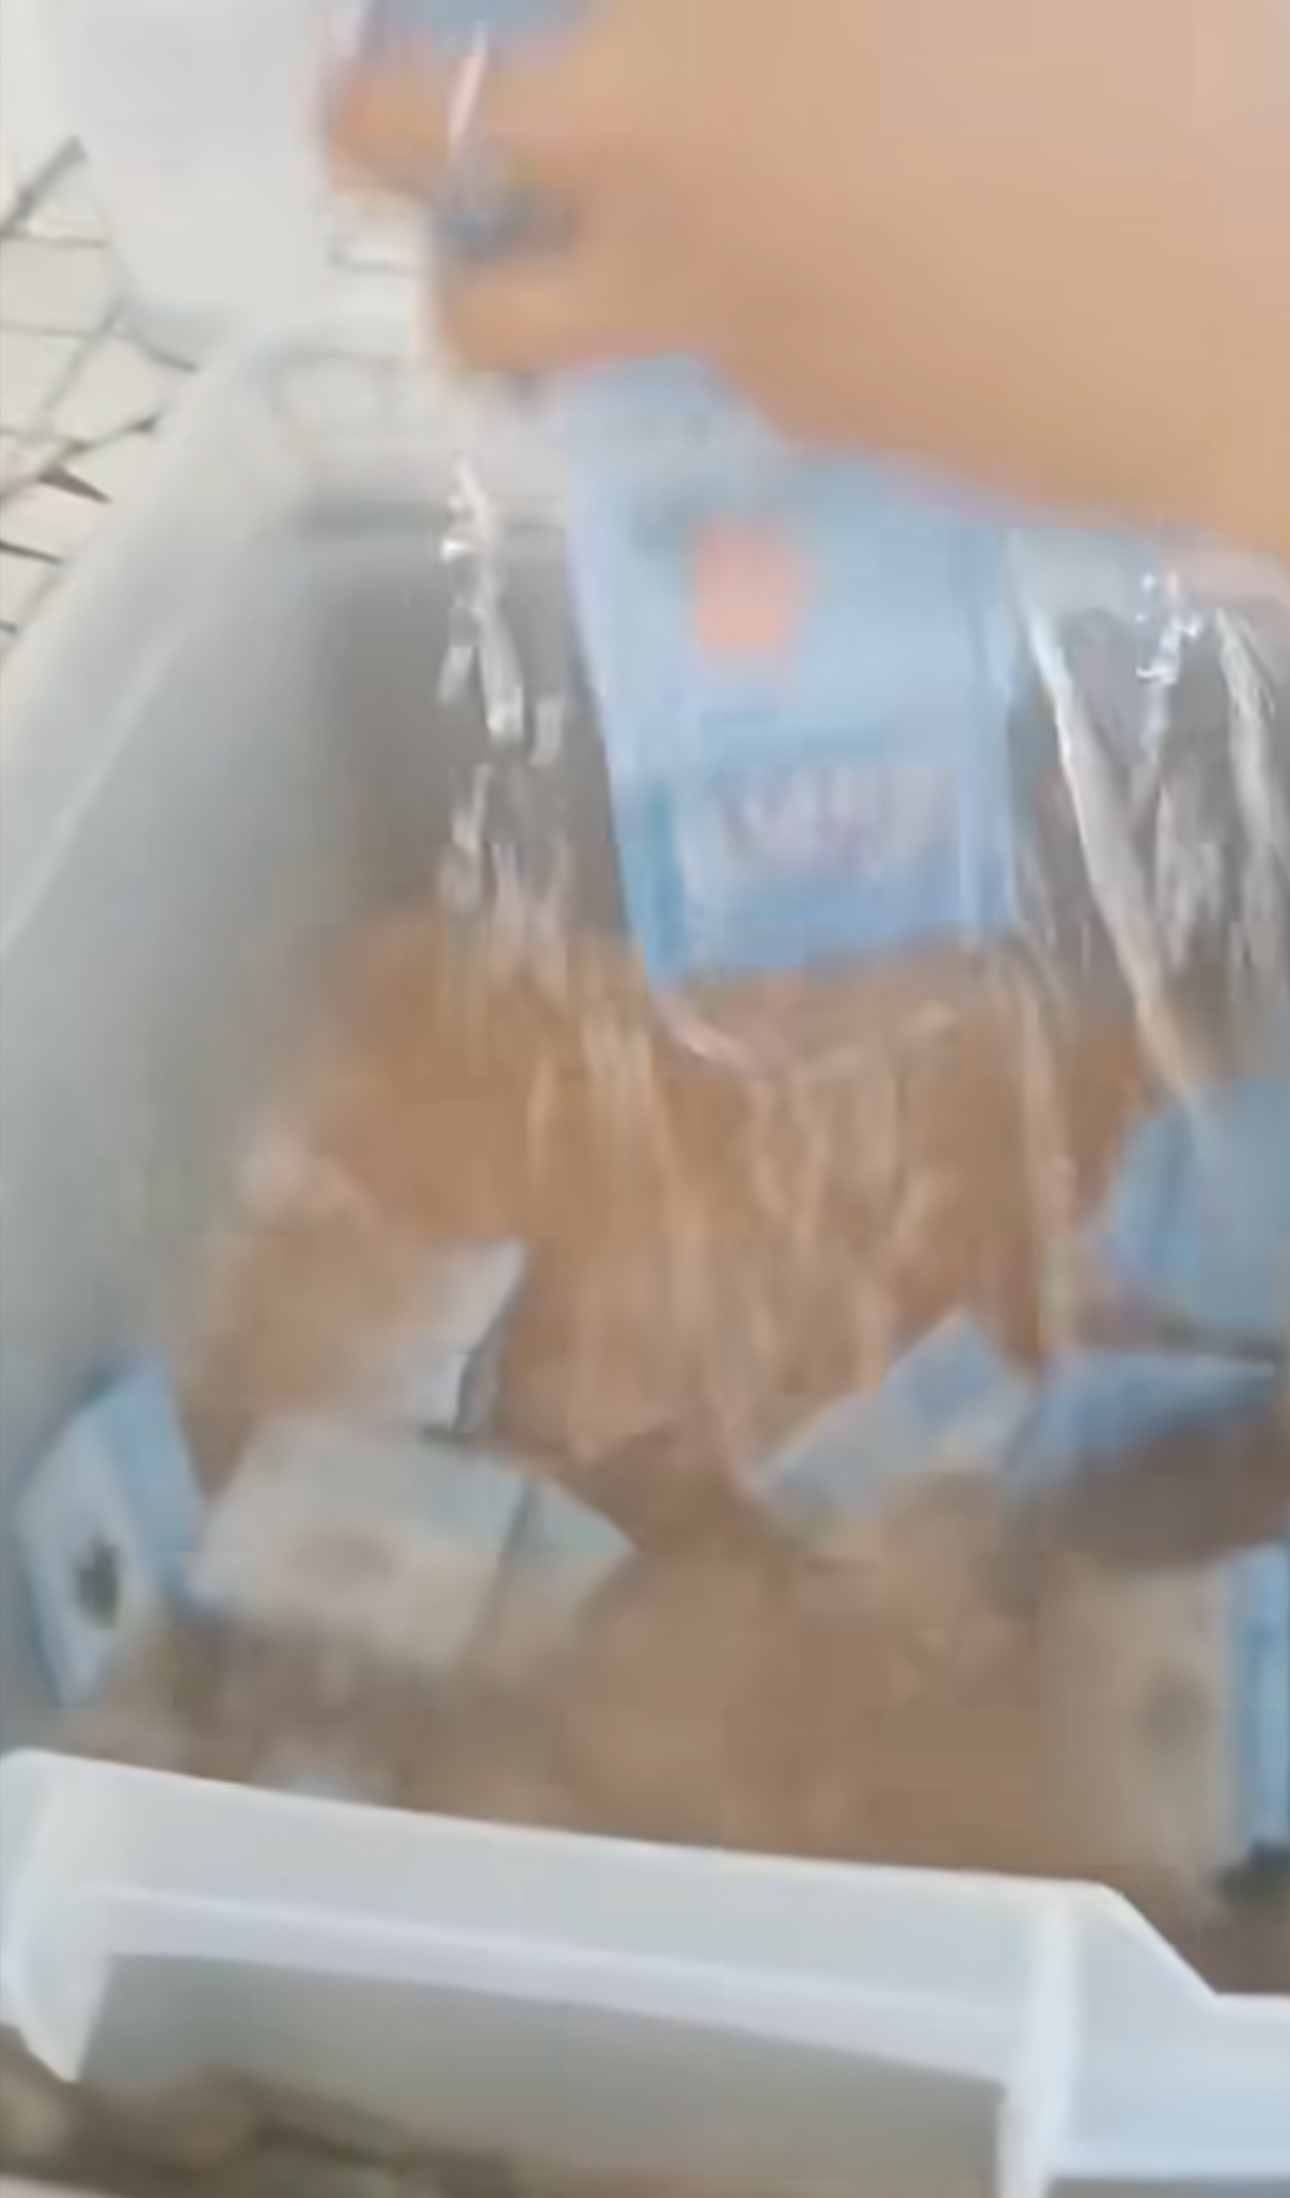 Woman rinses money received from students at a canteen and shows how dirty it actually is